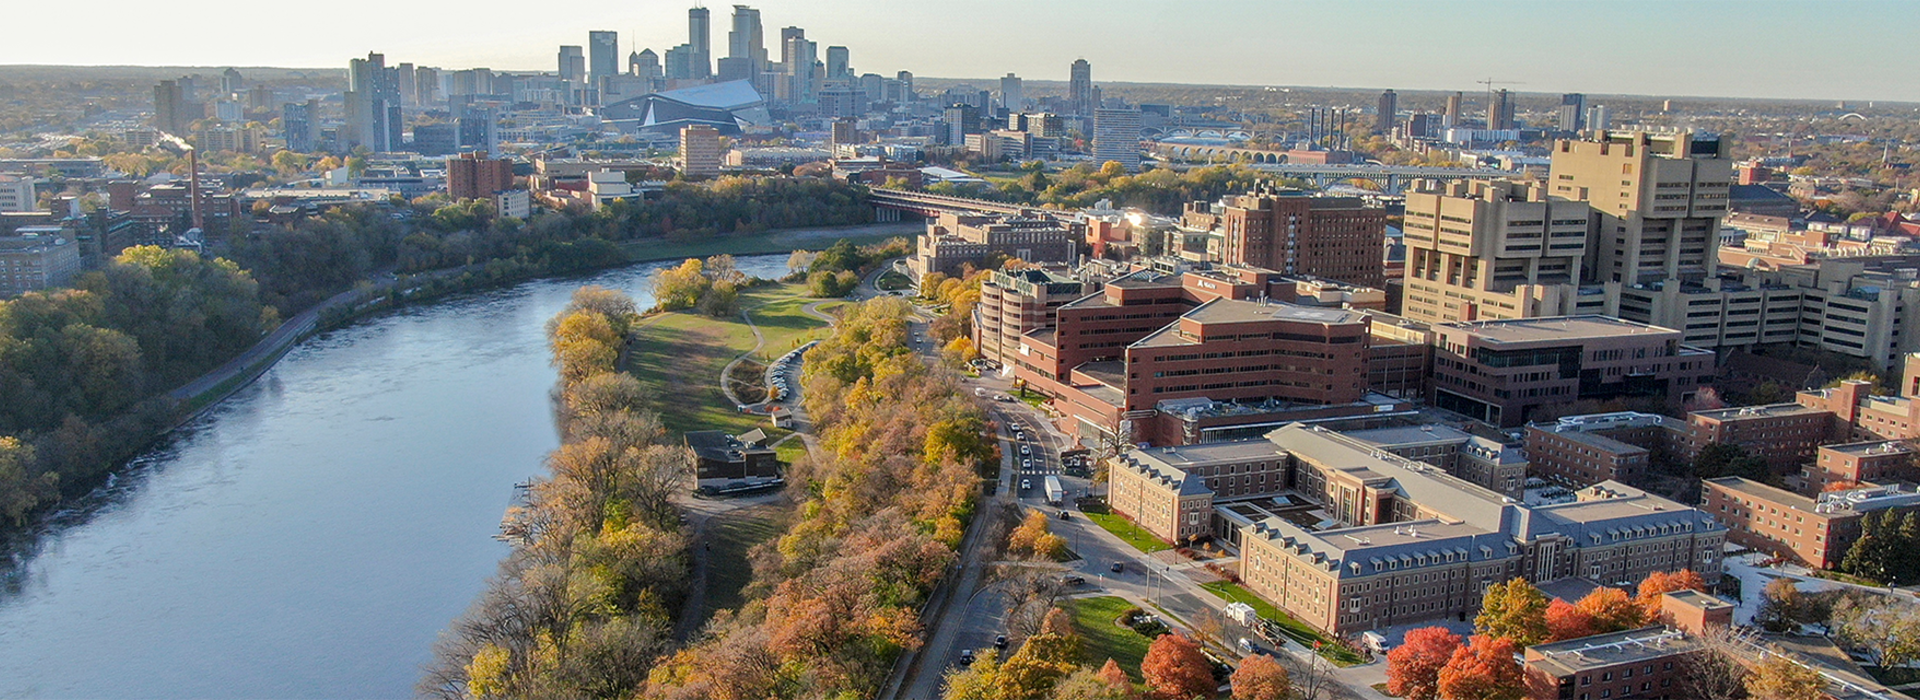 East Bank of campus in fall